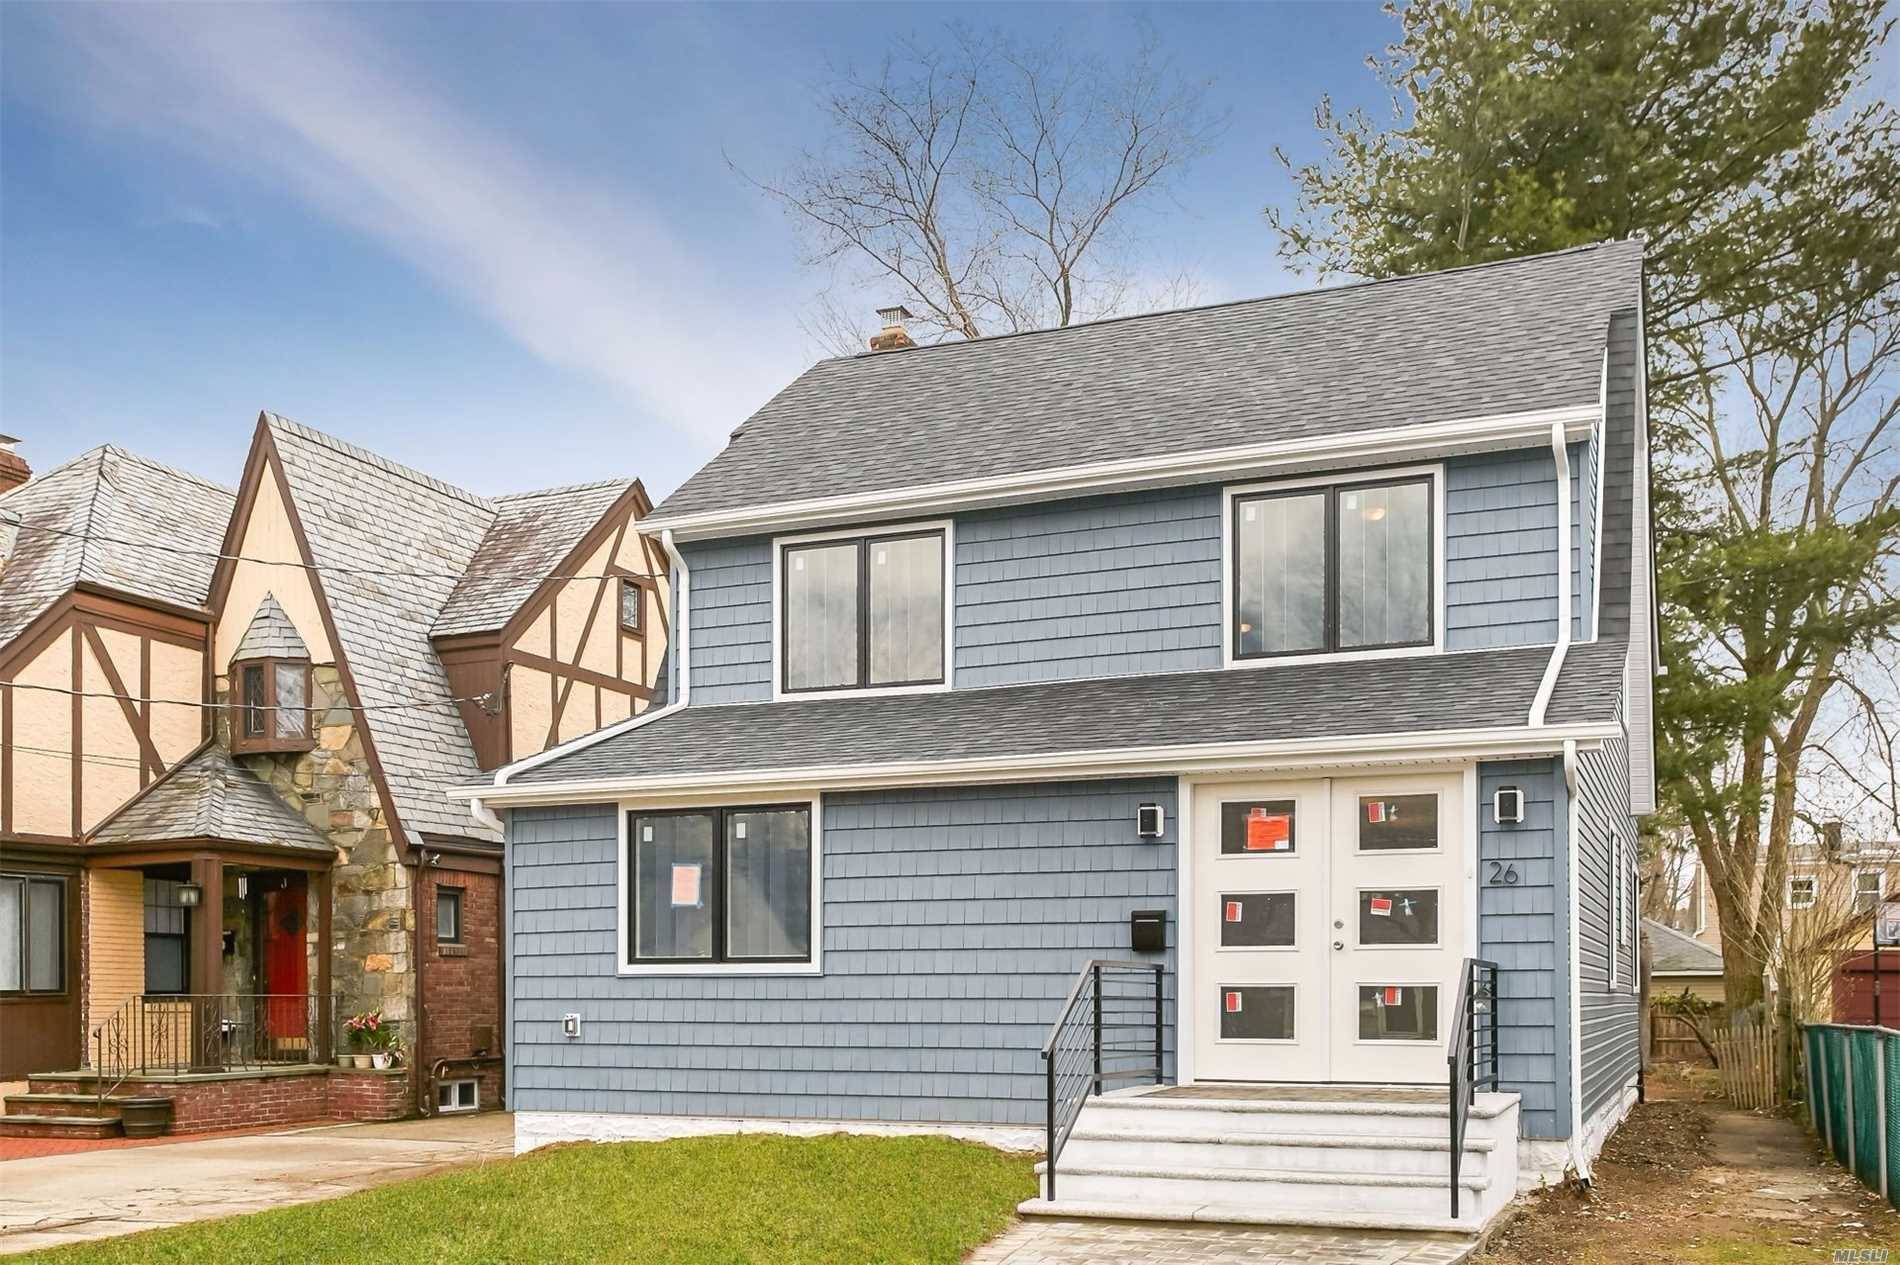 This Beautifully Renovated 4 Bedroom, 3 Bathroom Home Has Everything You Could Want In A Home.